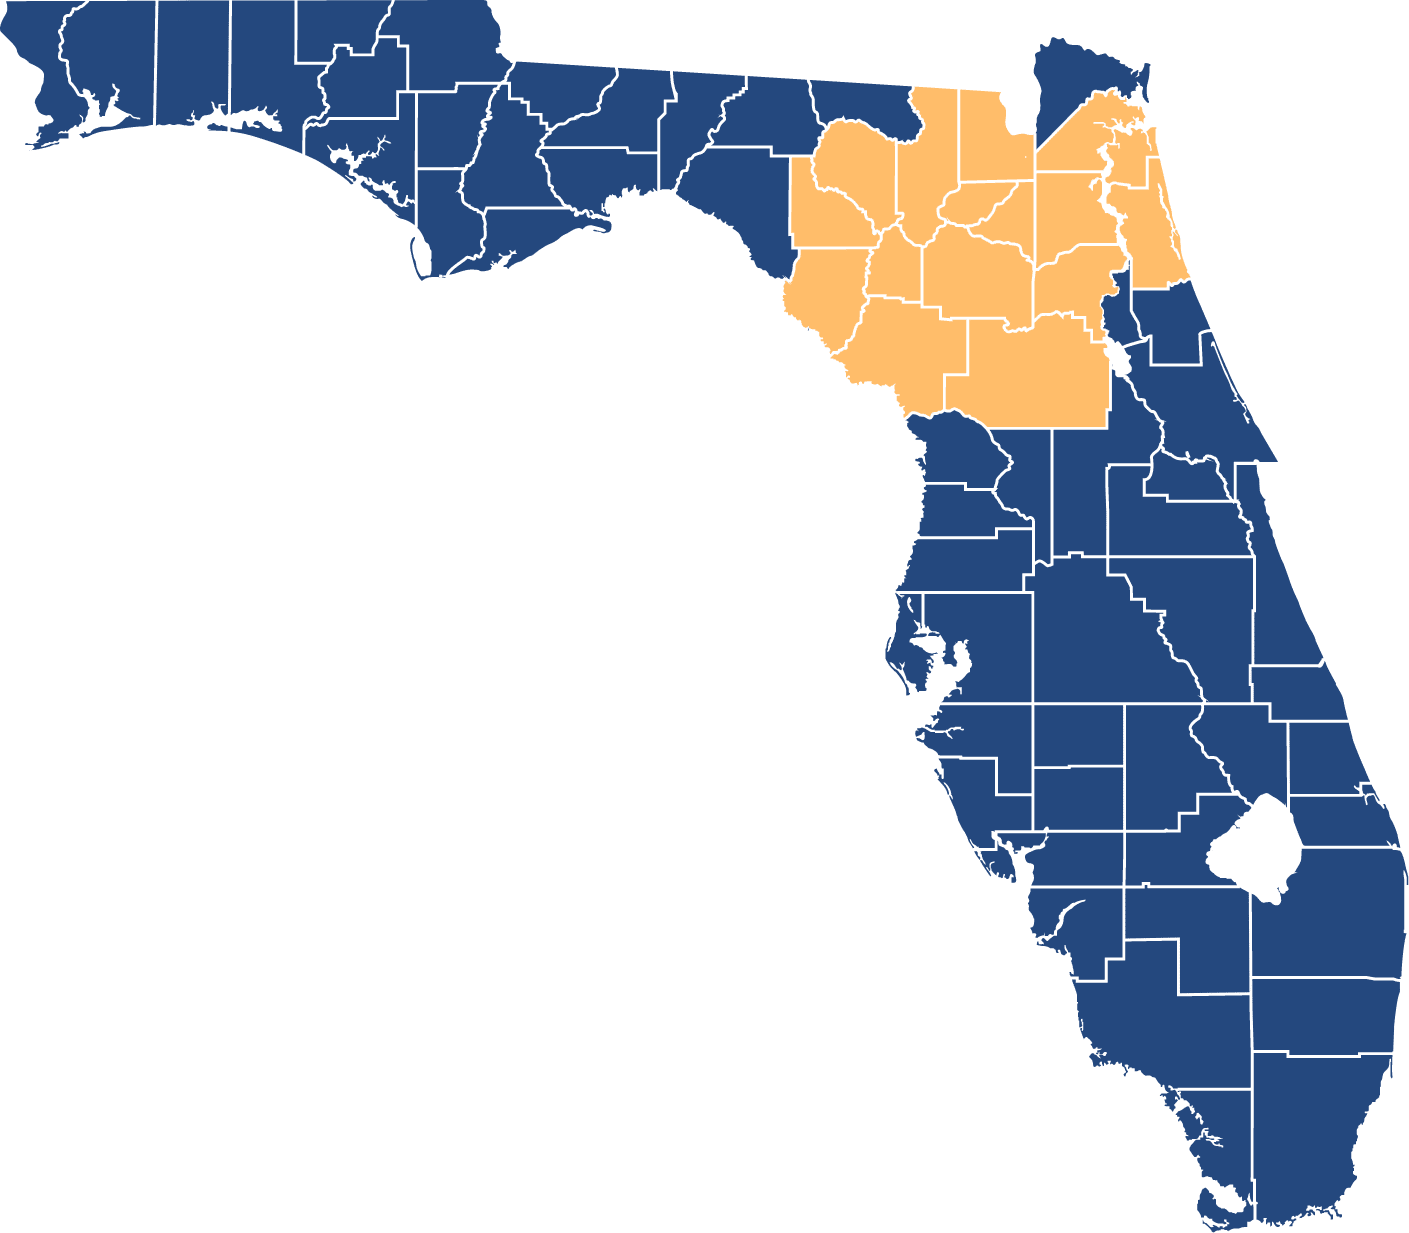 blue image of florida with several counties highlighted in yellow